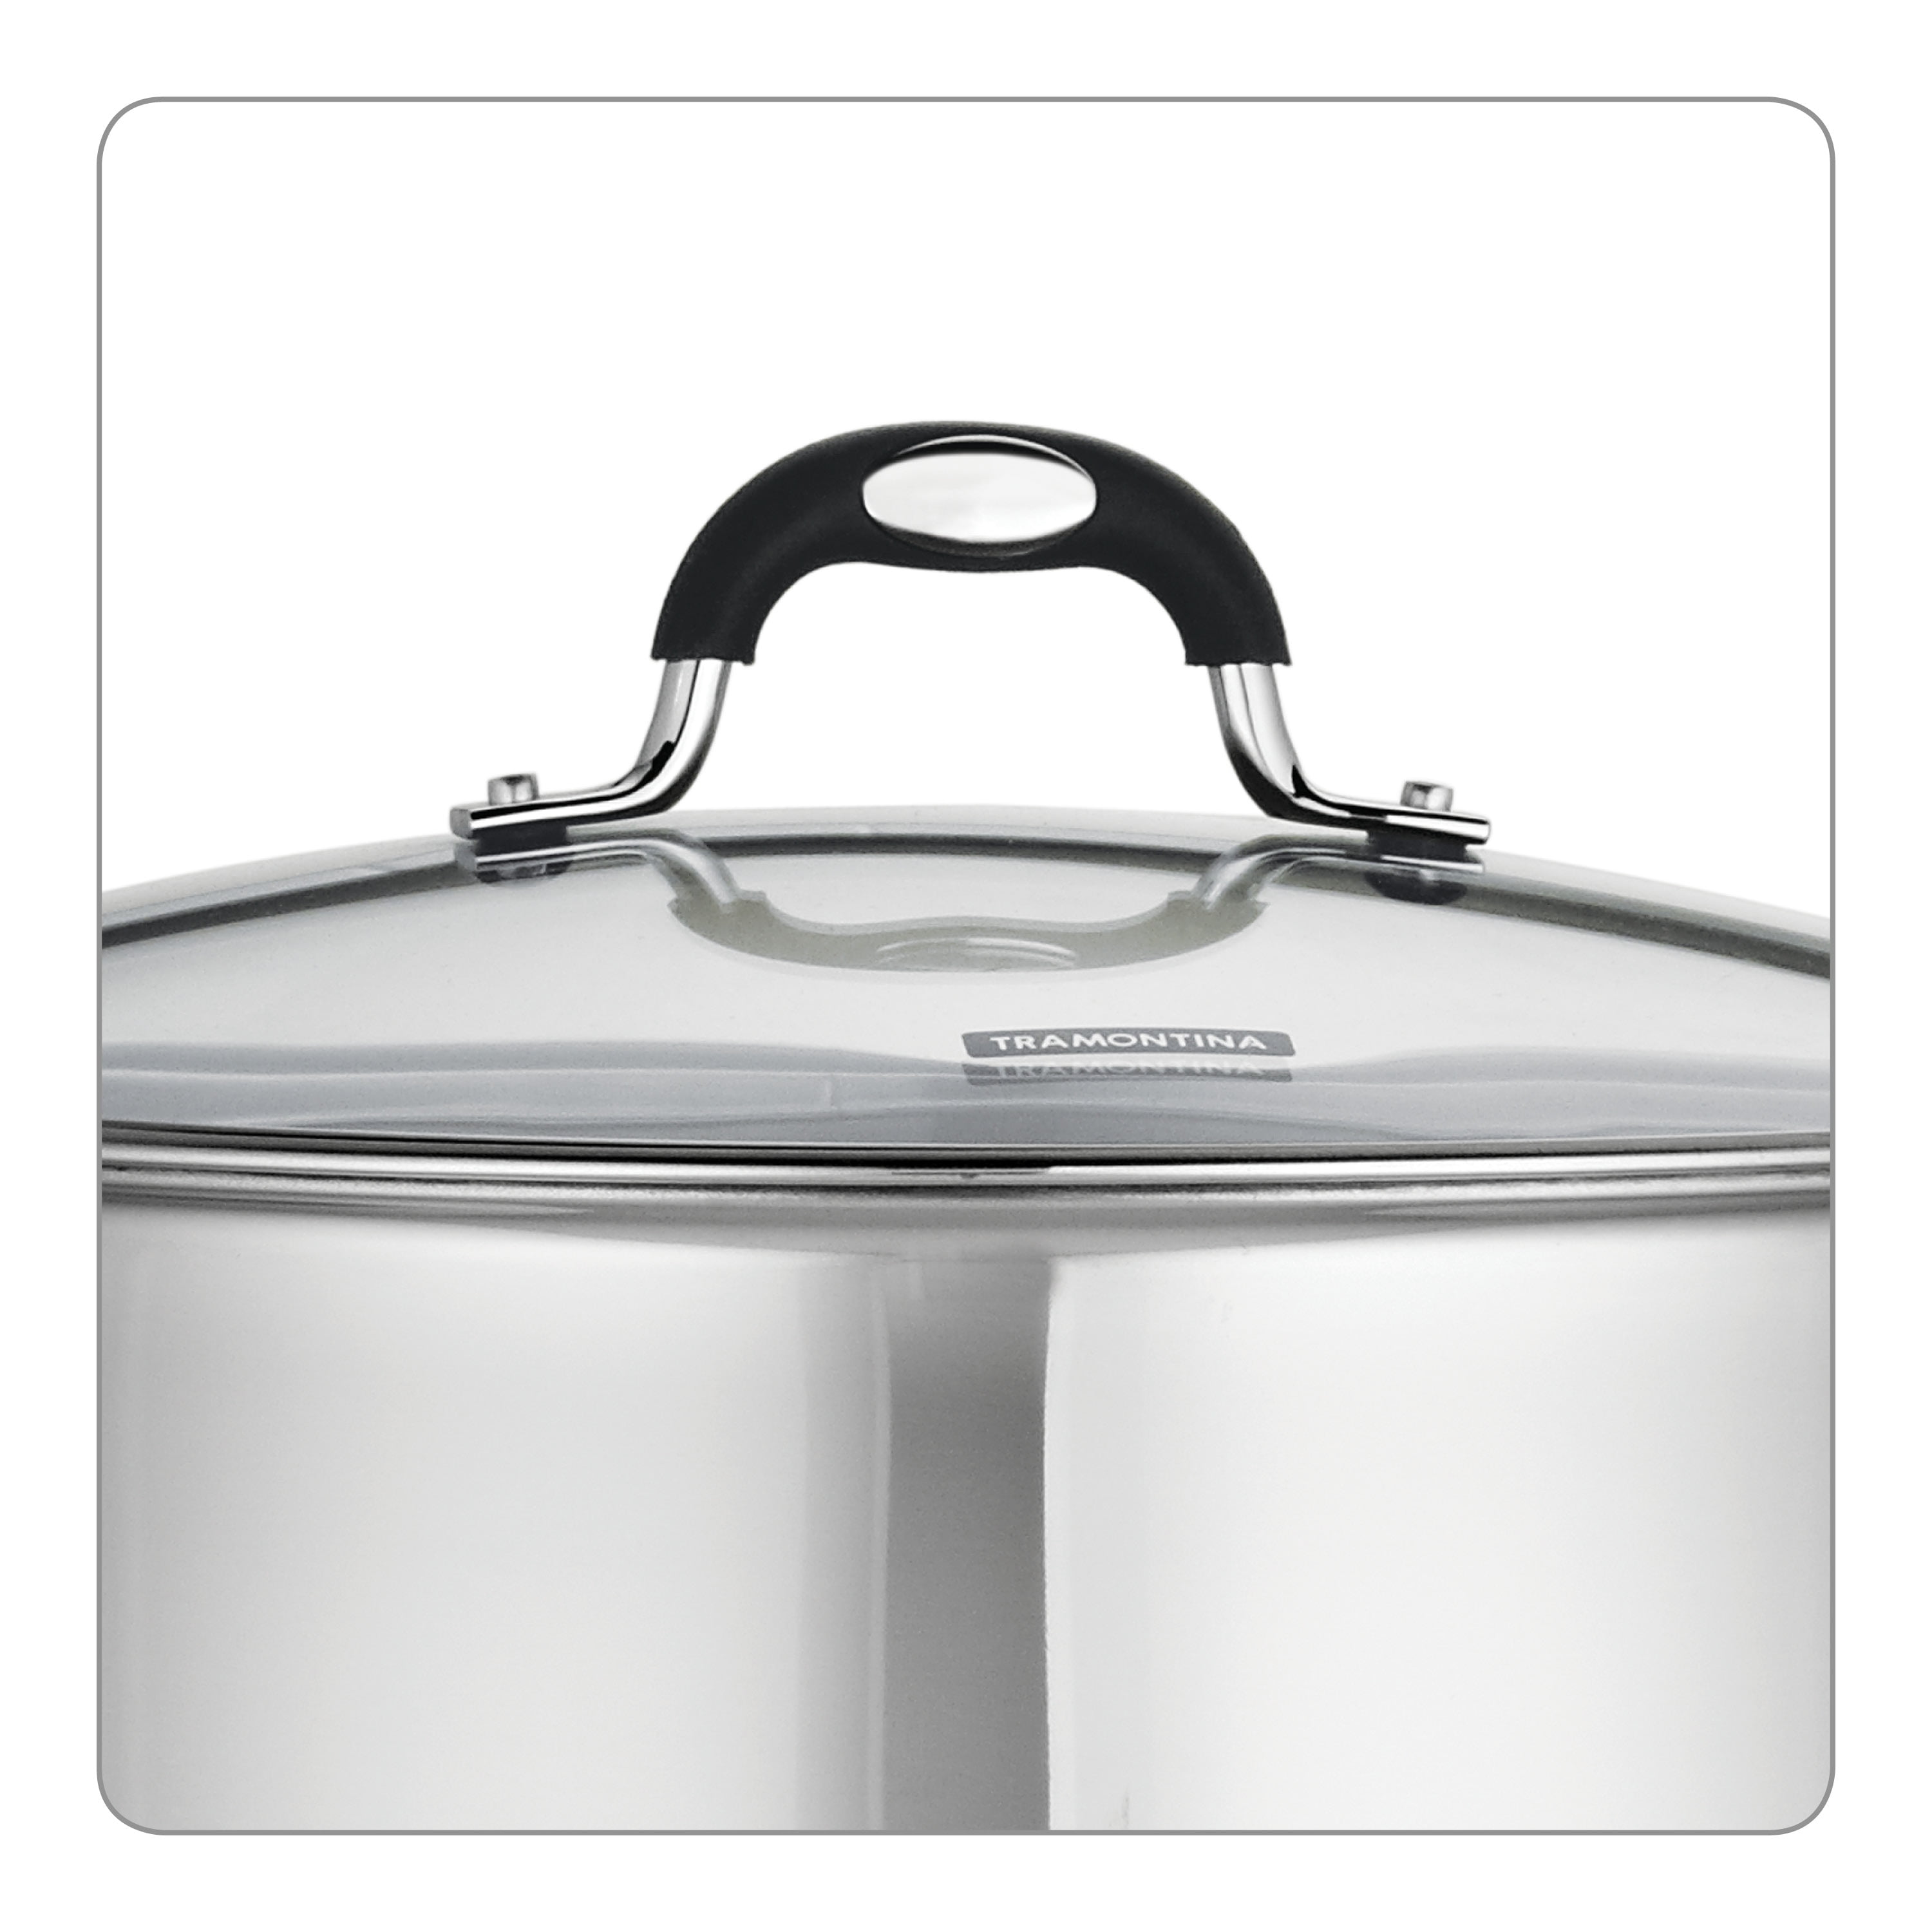 Tramontina 18/10 Stainless Steel 22-Quart Covered Stockpot 